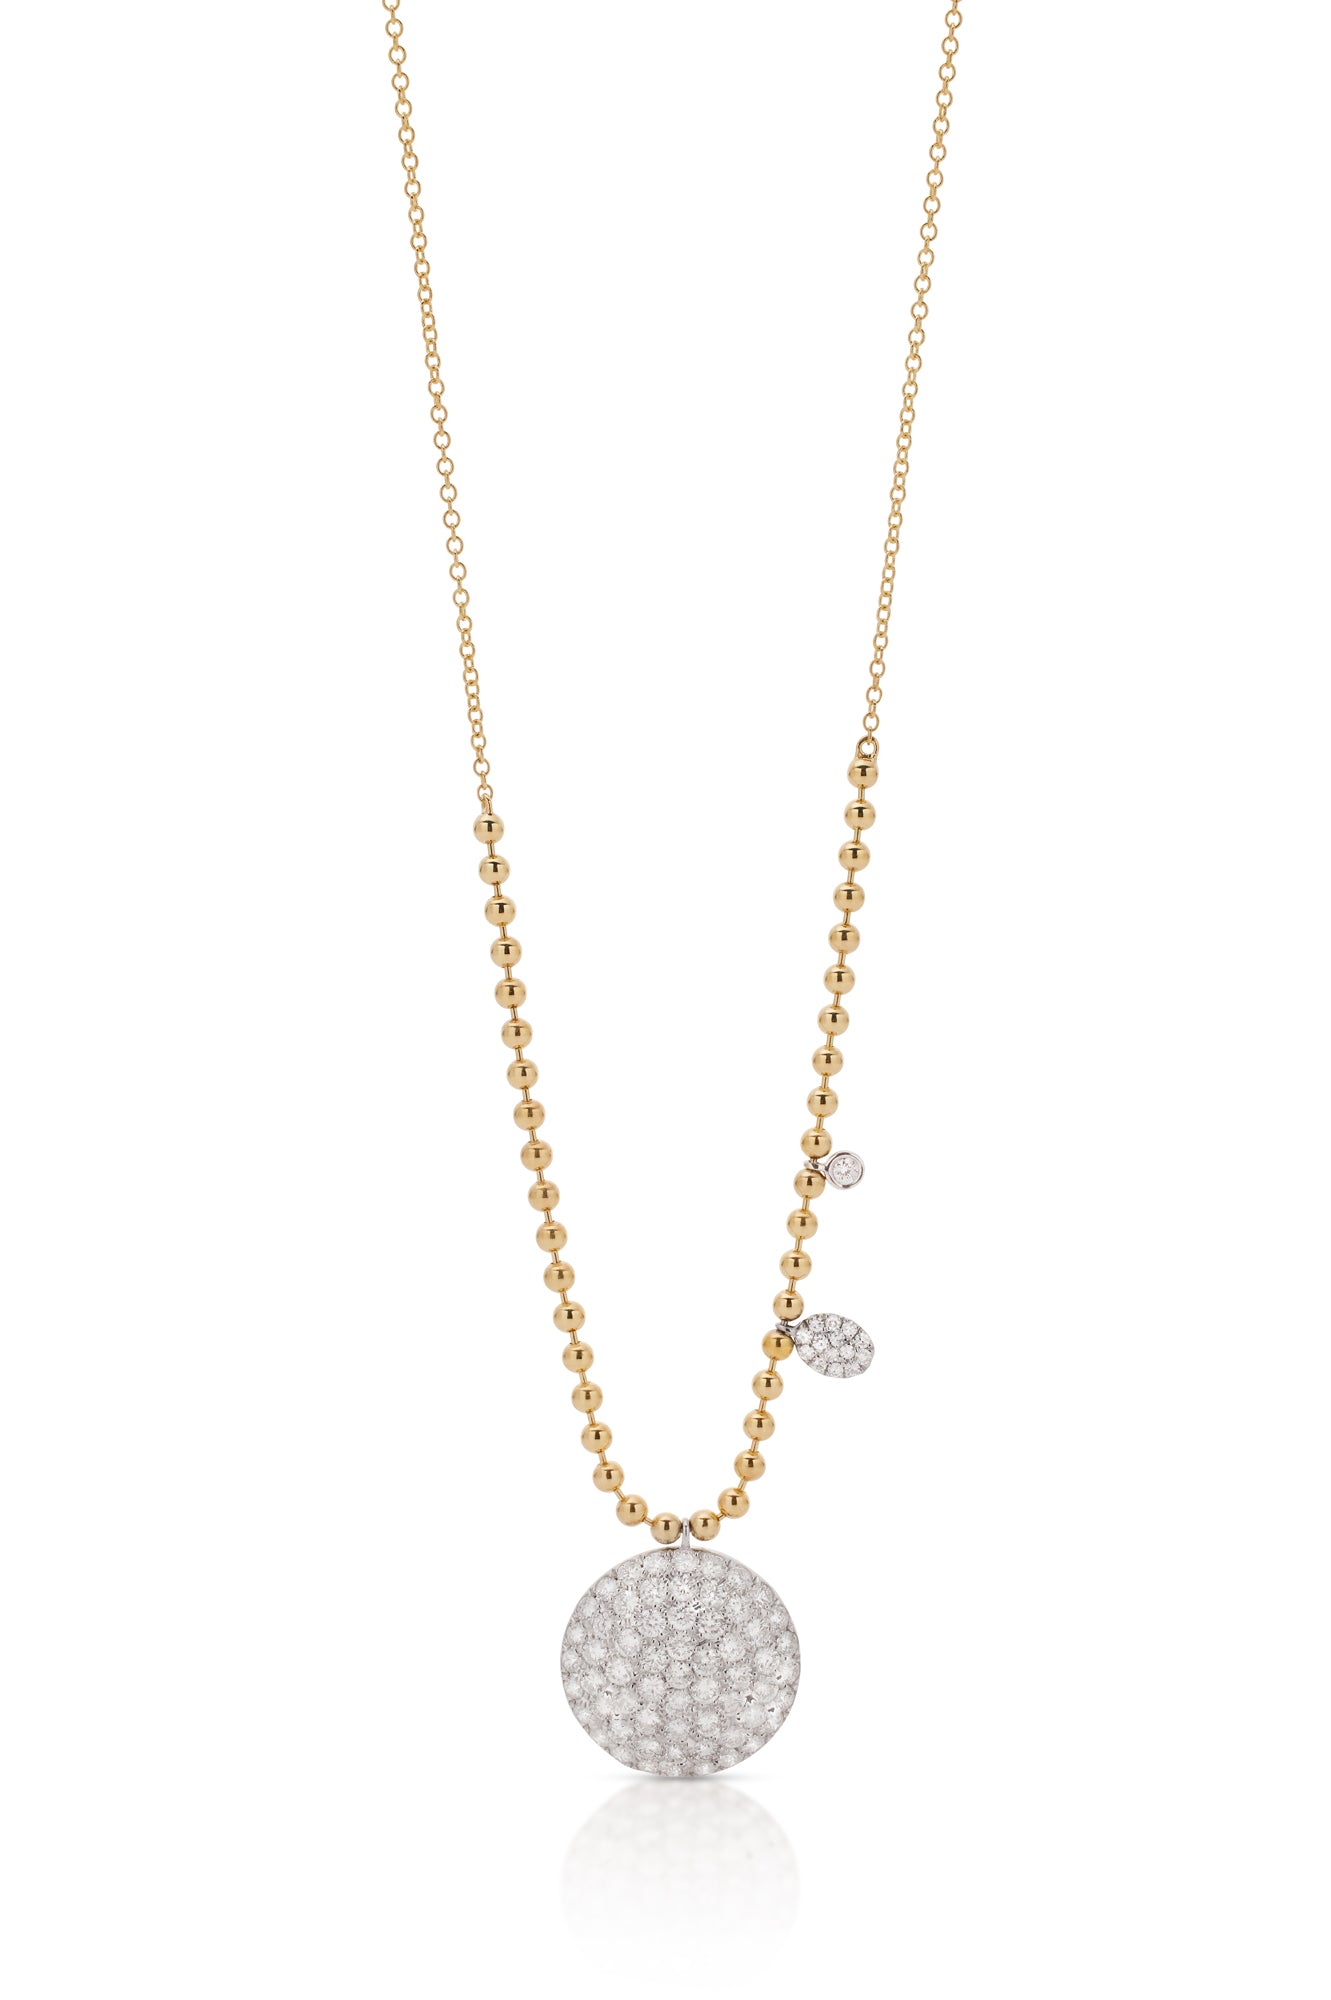 14KY Large Pave Disc and Diamond Drops Necklace